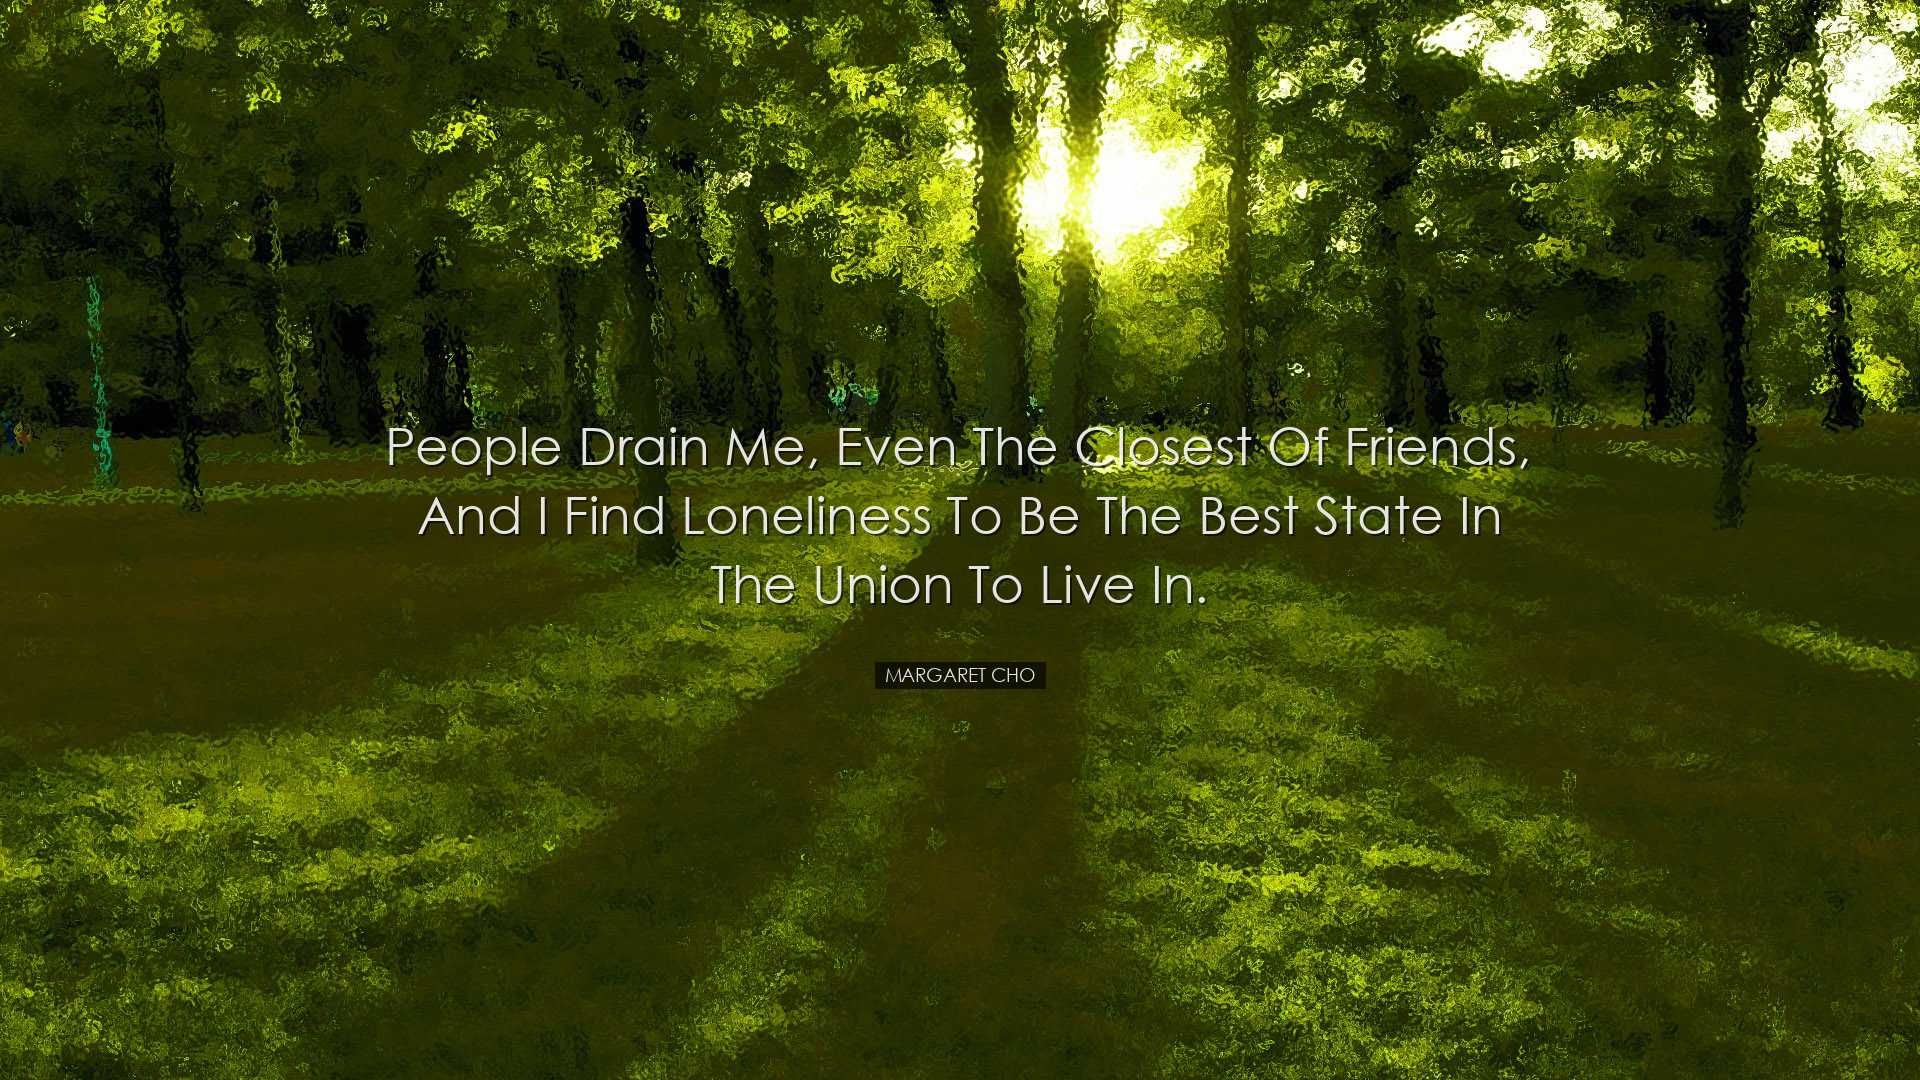 People drain me, even the closest of friends, and I find lonelines